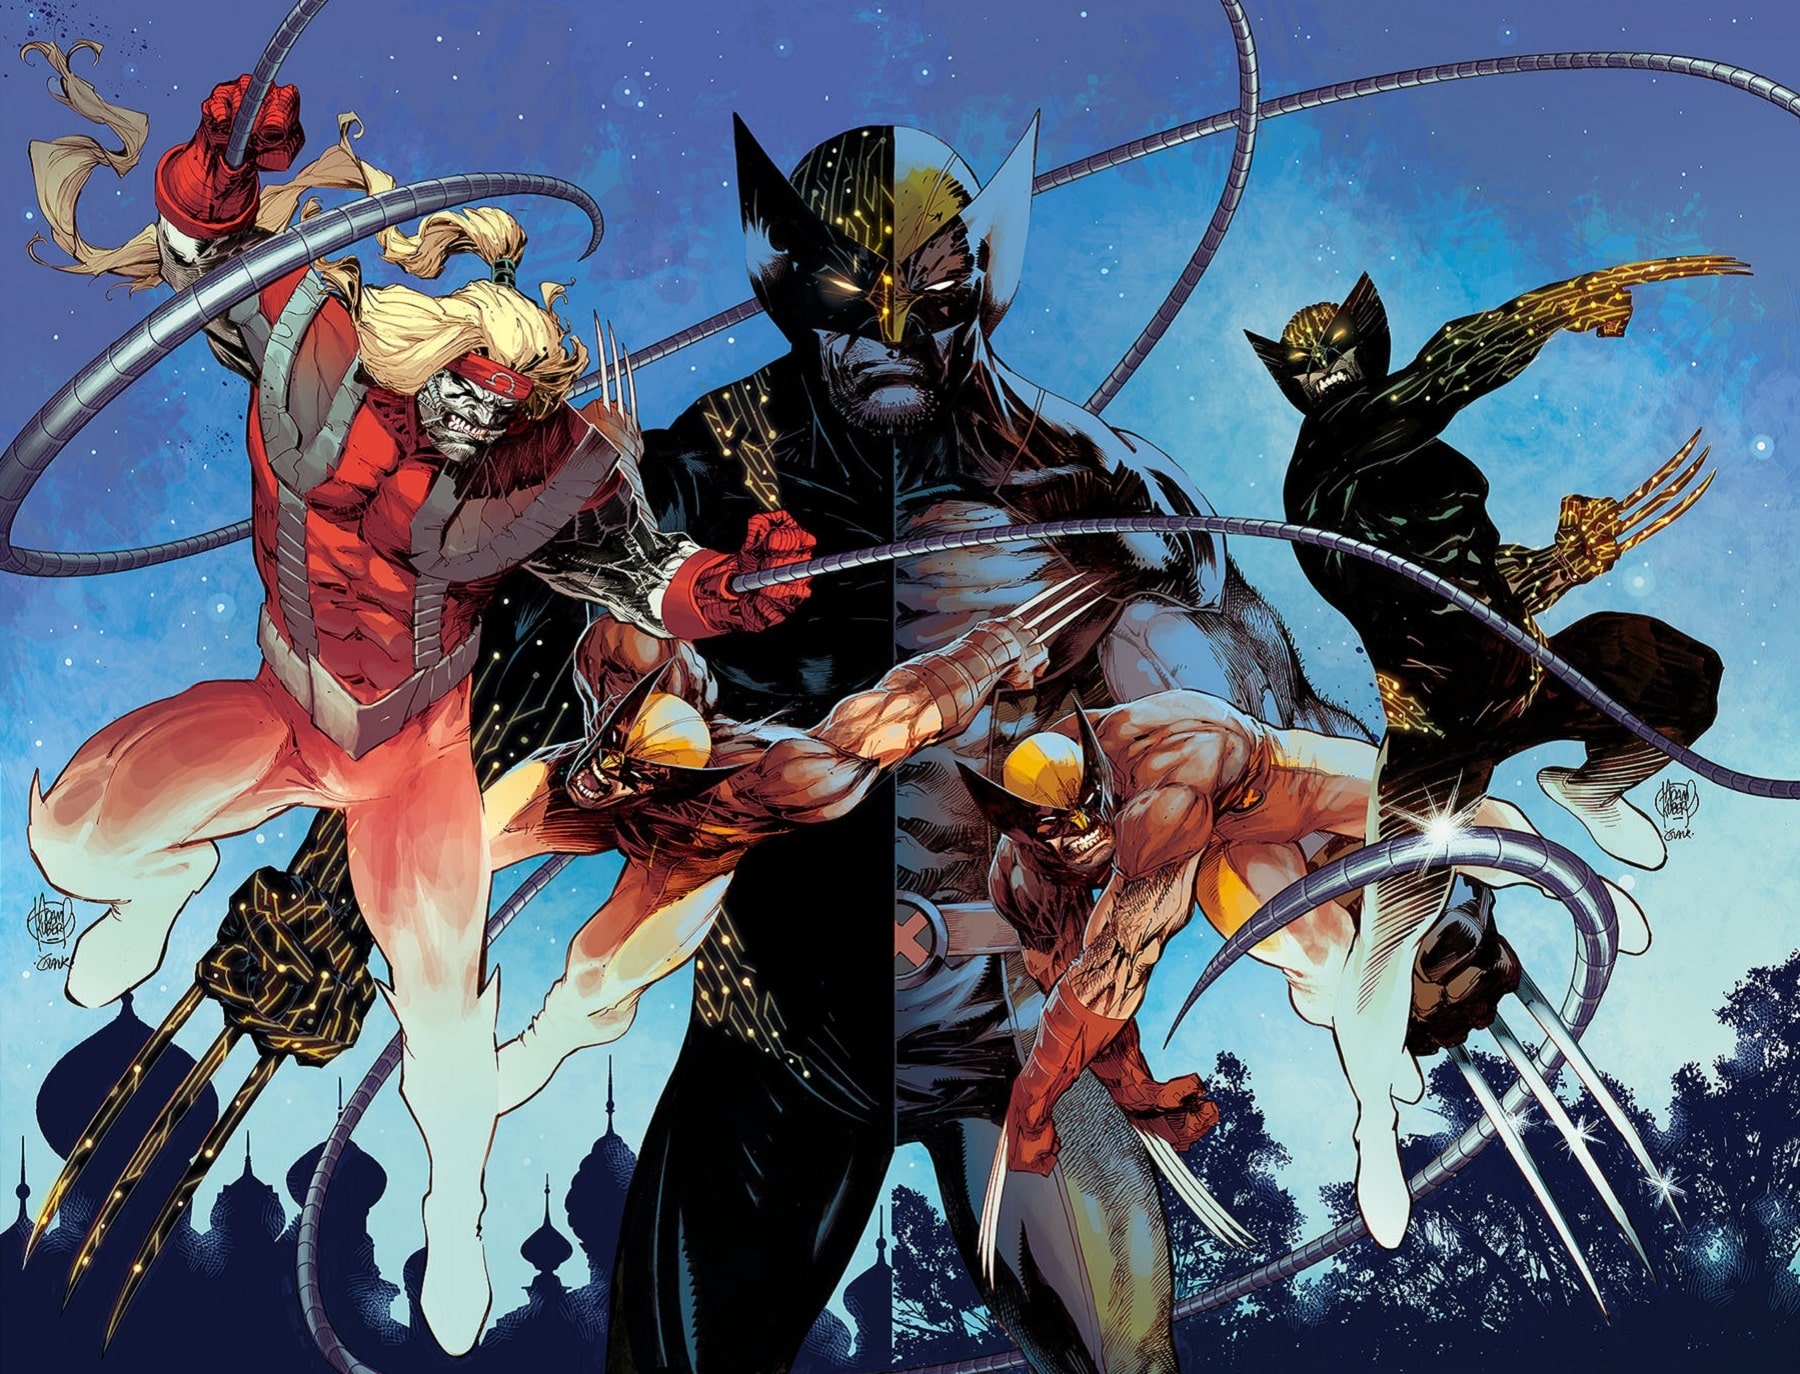 Marvel Unlimited gets all 10 issues of 'X Lives of Wolverine' and 'X Deaths of Wolverine'